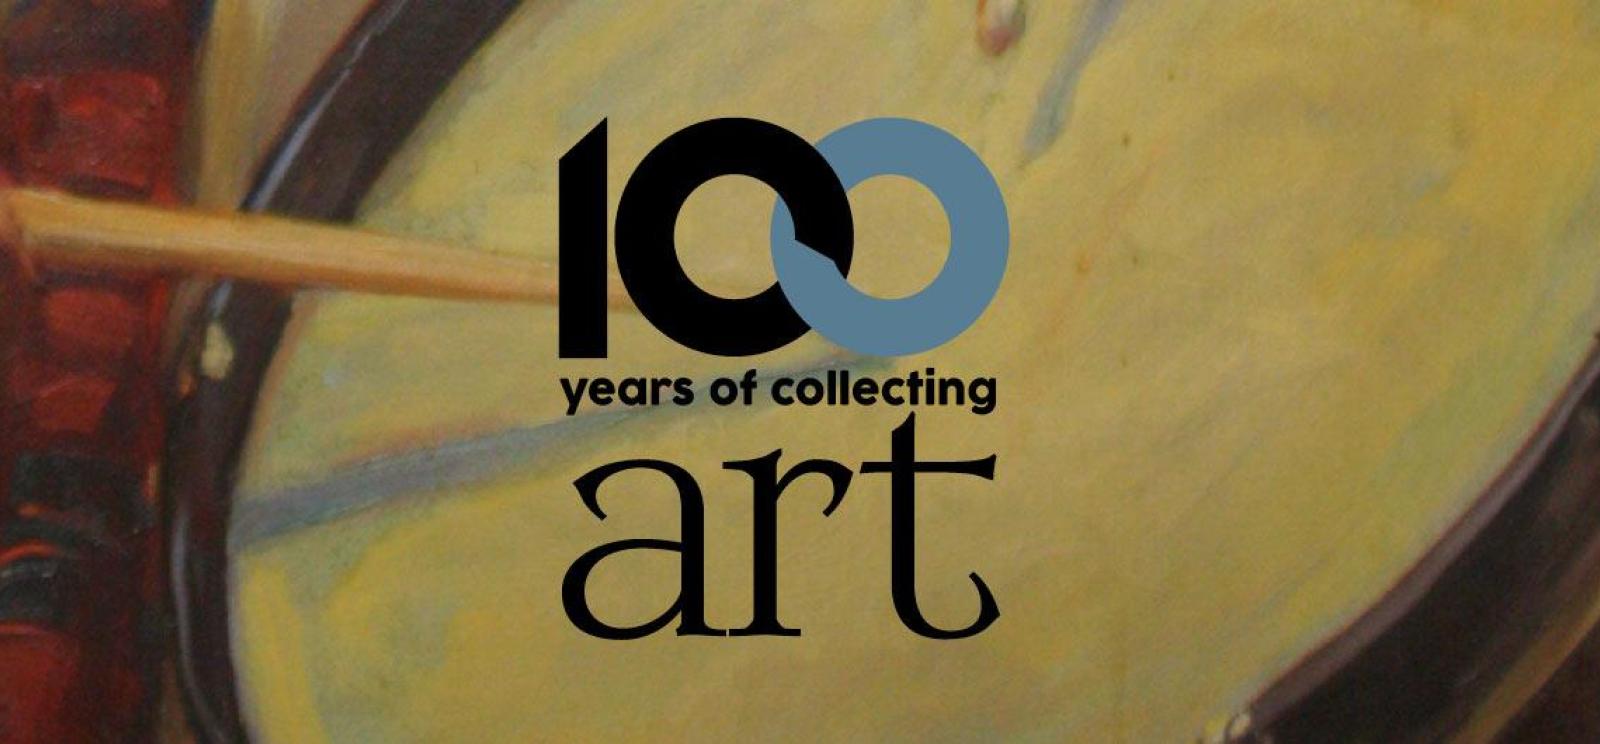 Background image: Painting of a snare drum with a person playing it. Foreground text: 100 Years of Collecting Art.